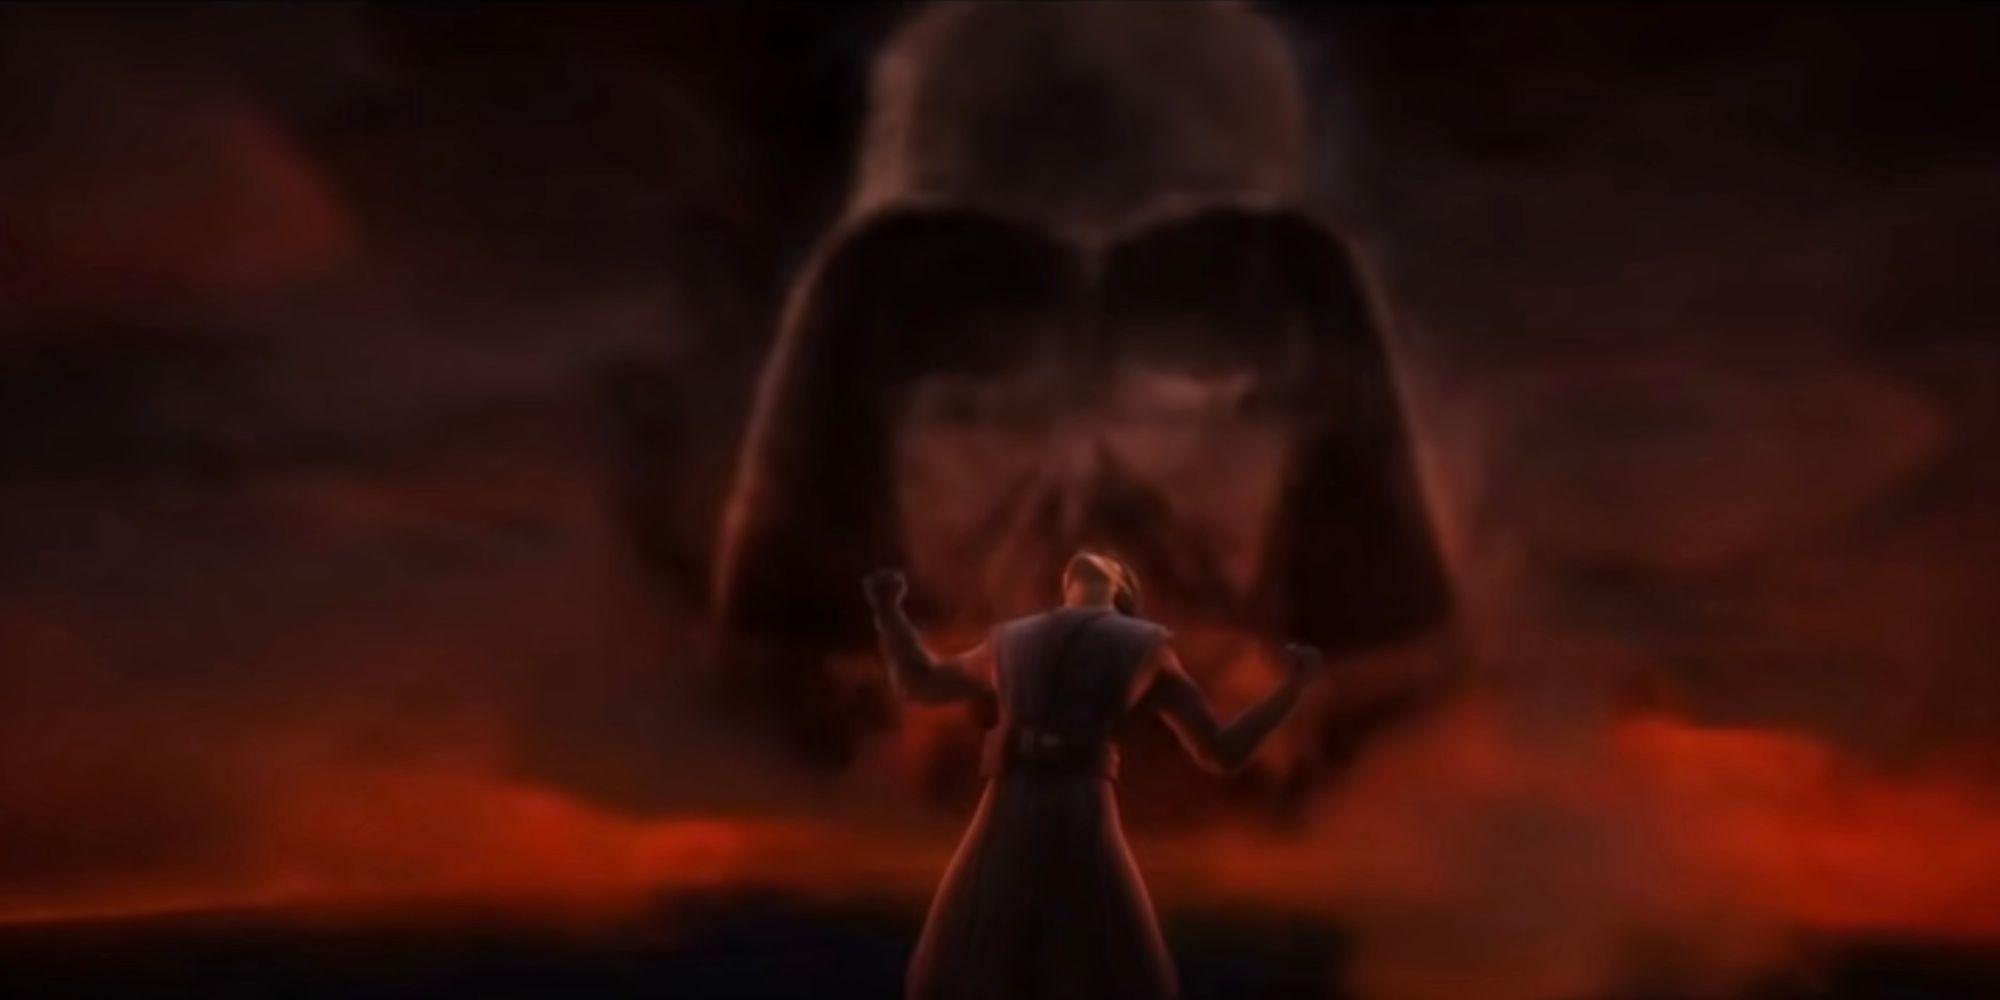 Anakin sees his future as Vader in Clone Wars TV series